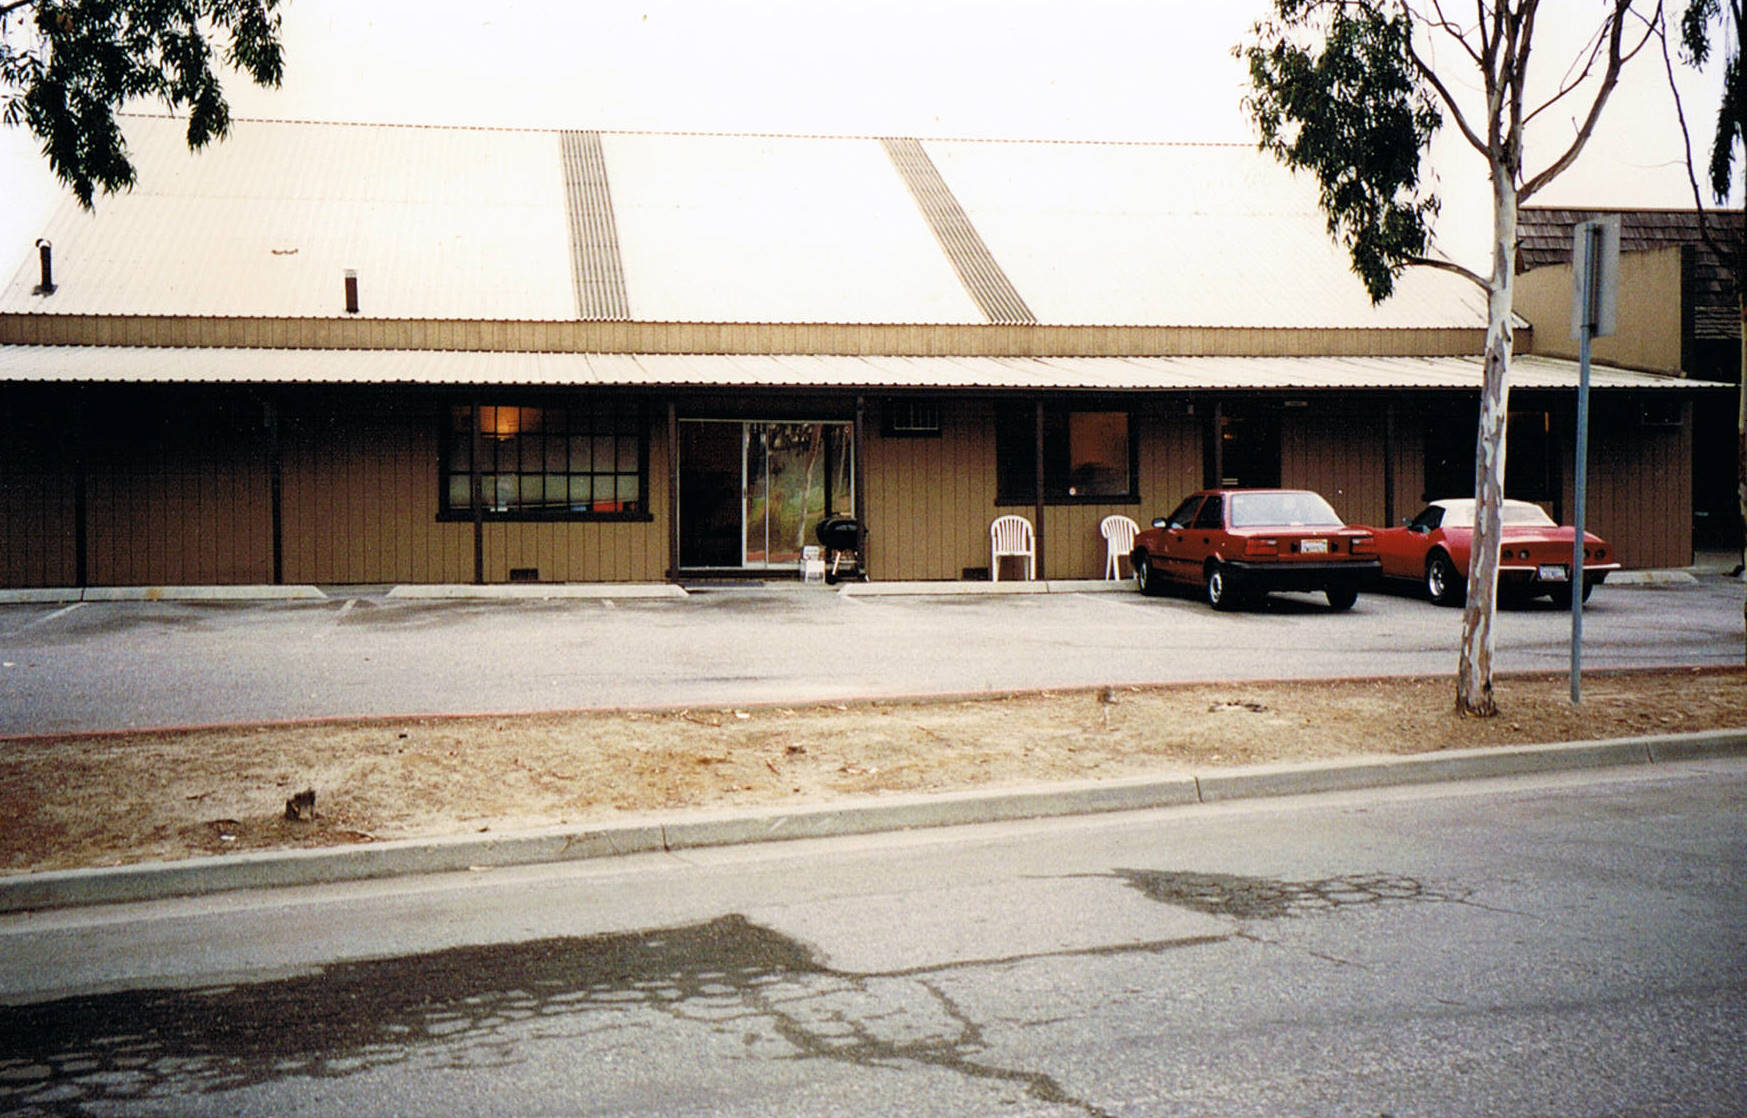 NTI HQ c. 1994<br />Little Red on left and Big Red on Right<br />1901 Embarcadero Road<br />Palo Alto, CA